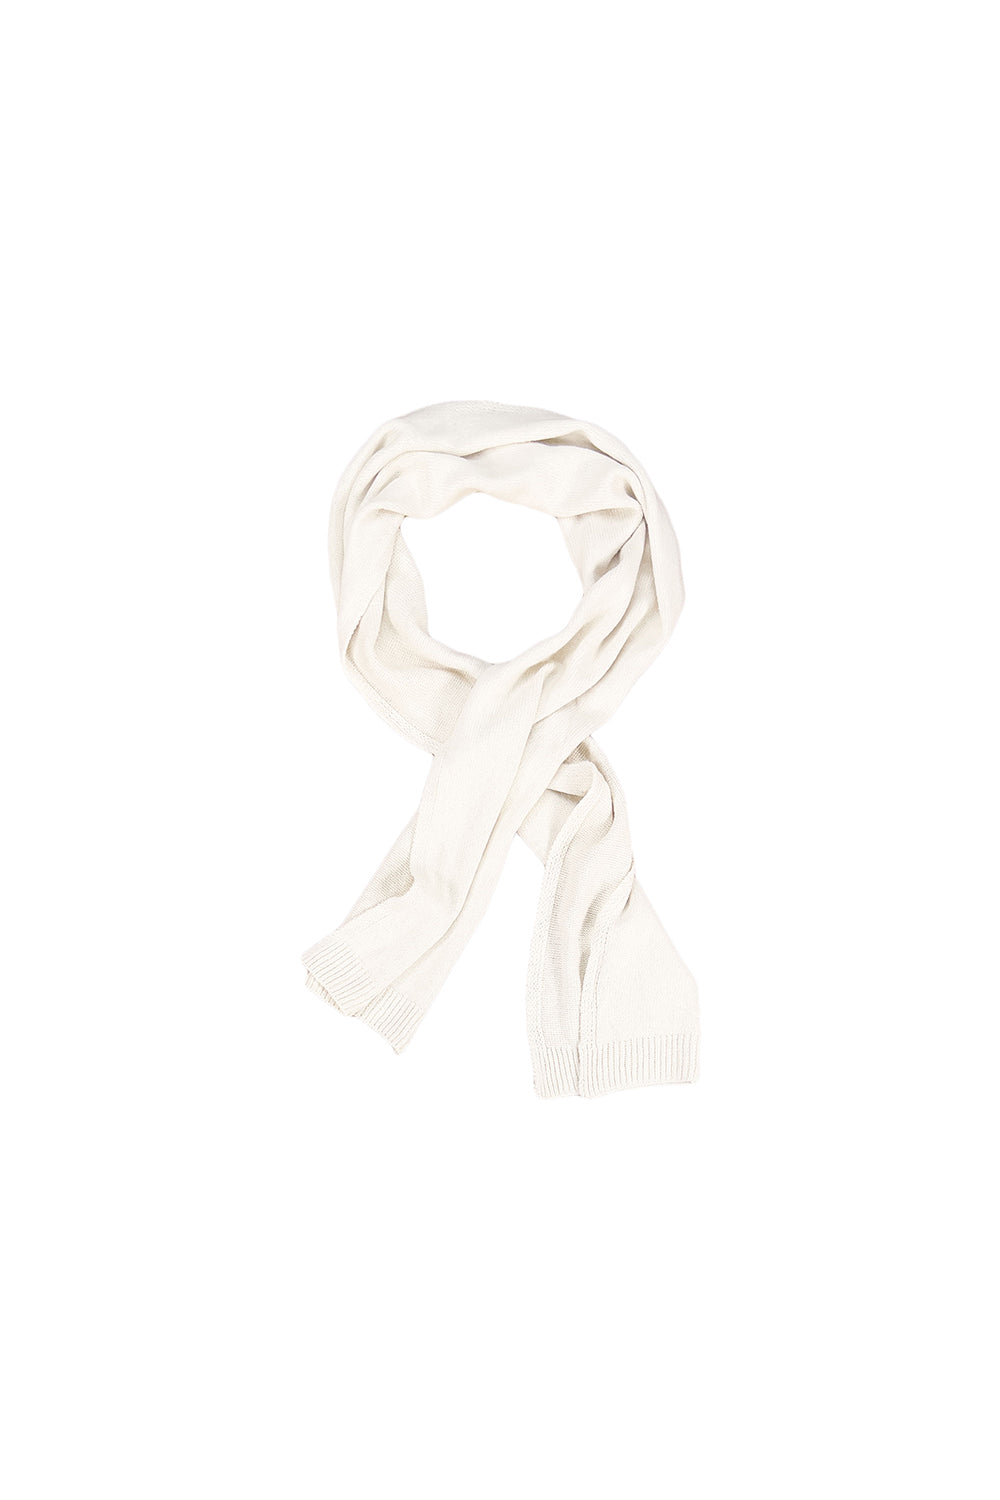 Hemp Wool Scarf | Jungmaven Hemp Clothing & Accessories / Color: Washed White